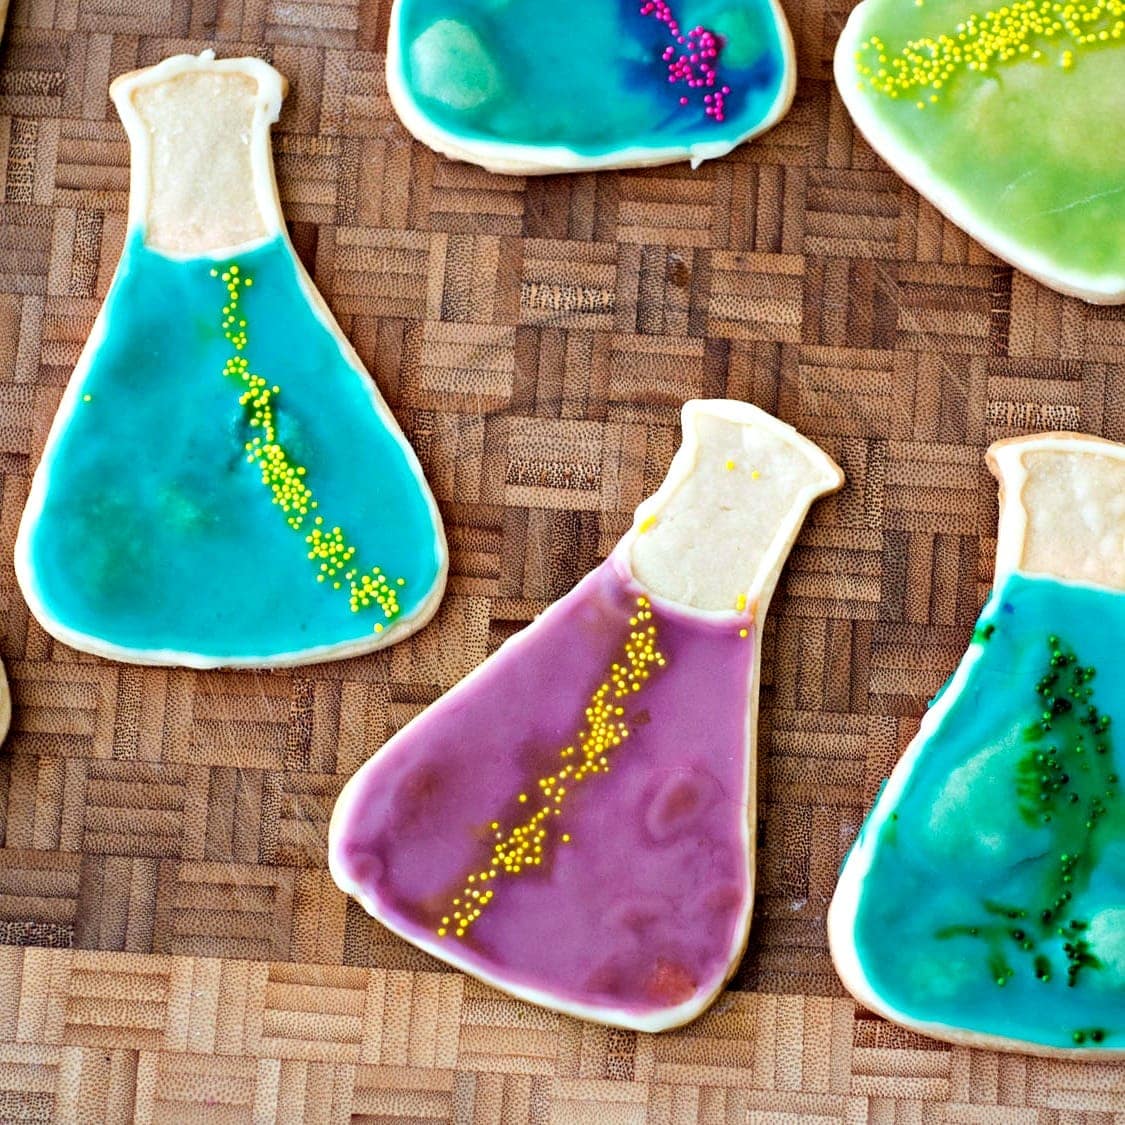 A group of cookies with icing in the shape of a flask.